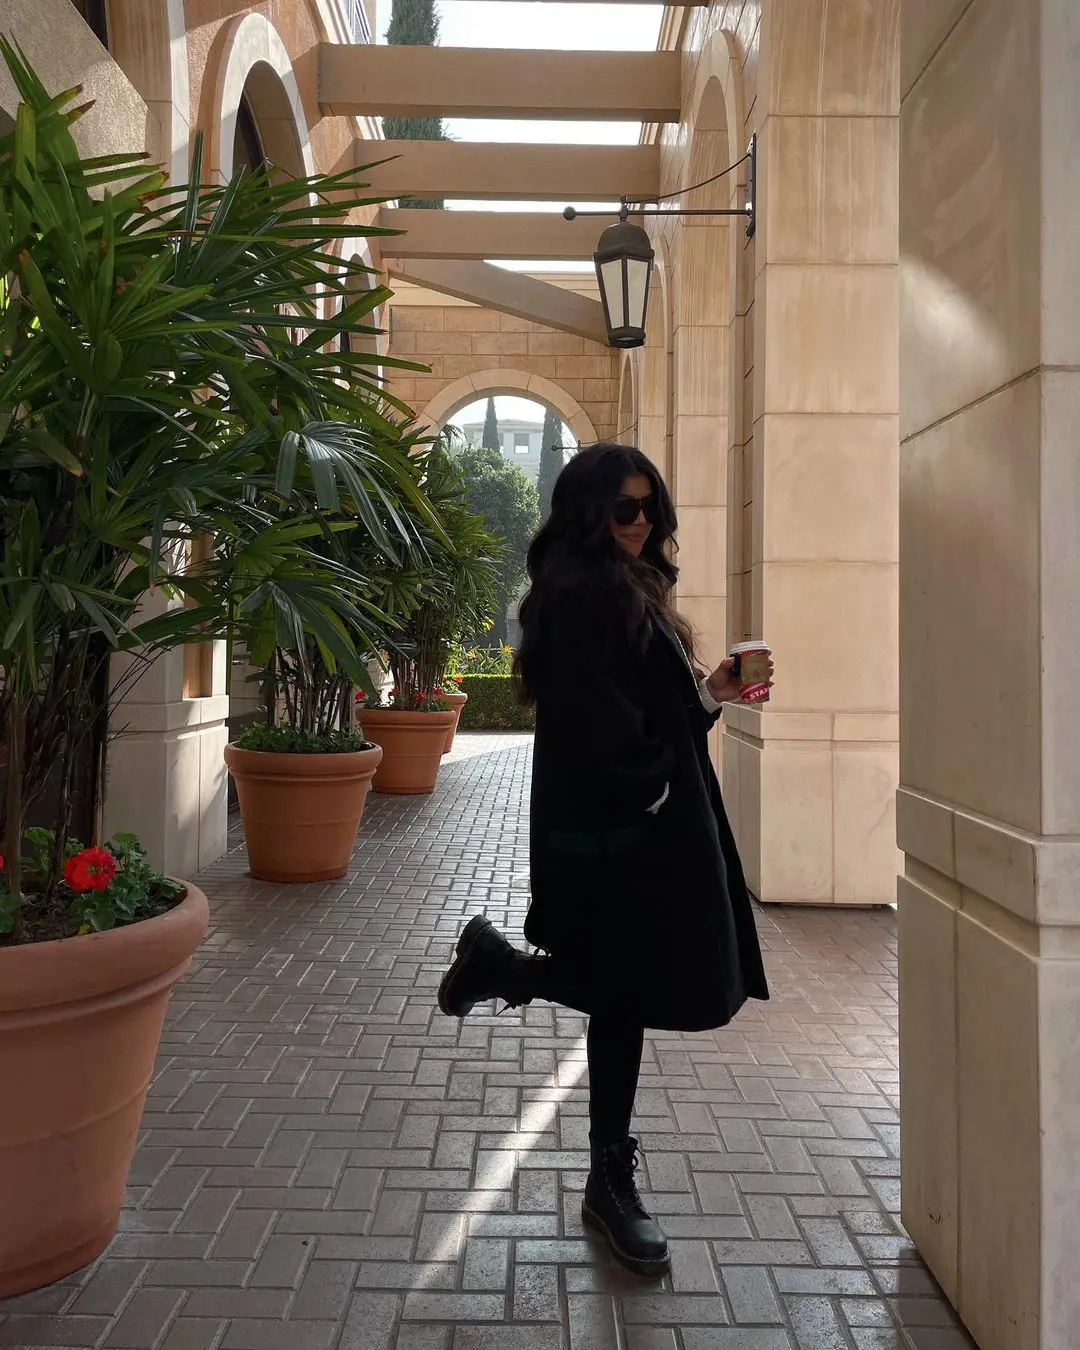 Valeria poses for a photo holding a coffee wearing a long, black coat and a boot.